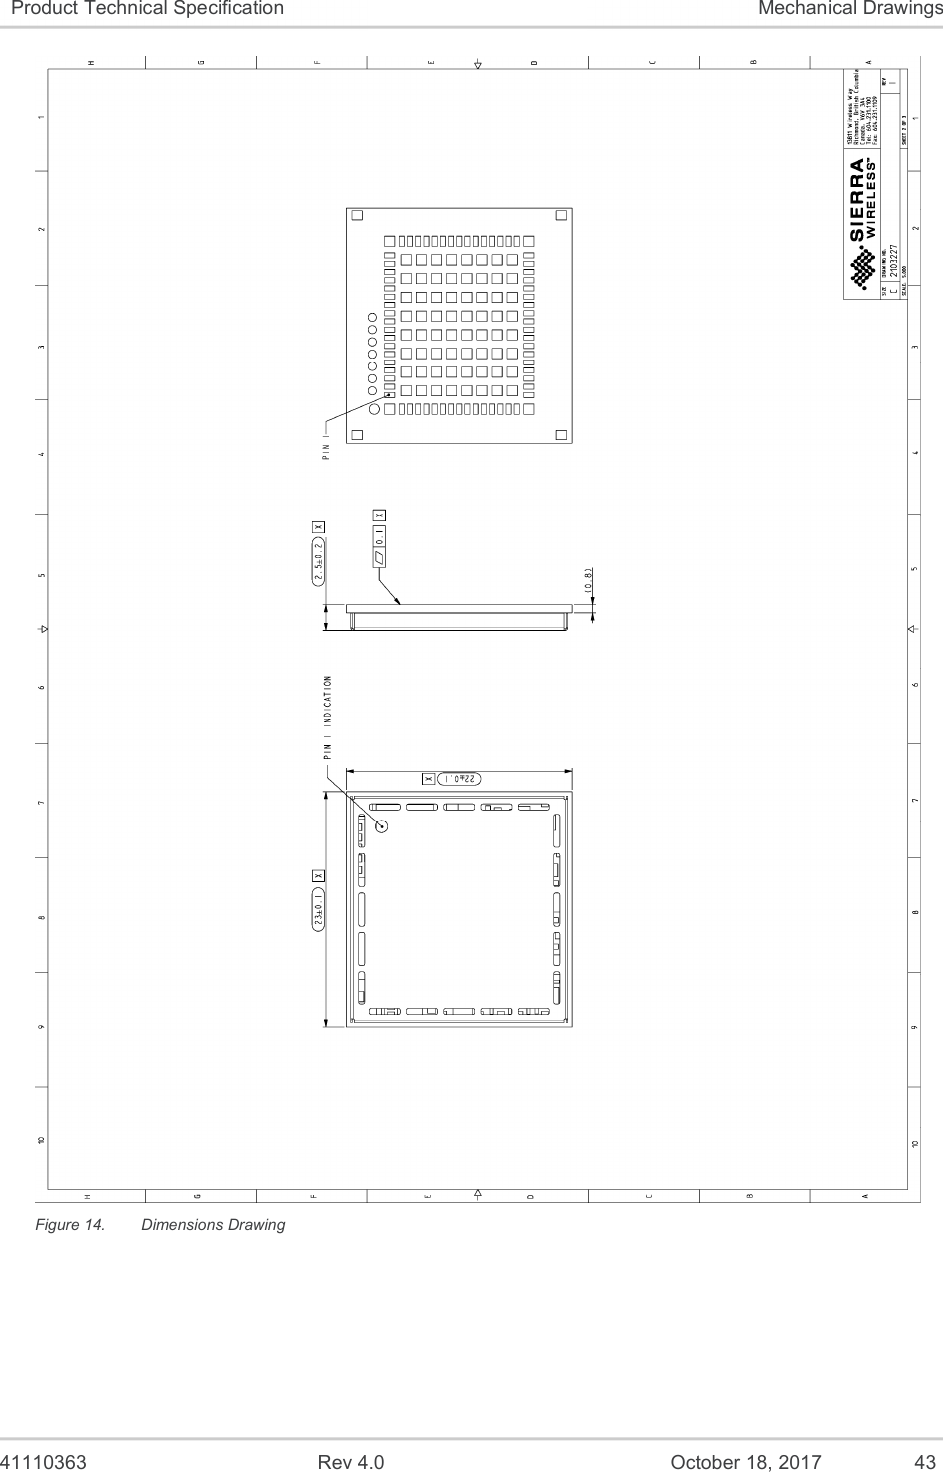   41110363  Rev 4.0  October 18, 2017  43 Product Technical Specification  Mechanical Drawings  Figure 14.  Dimensions Drawing 